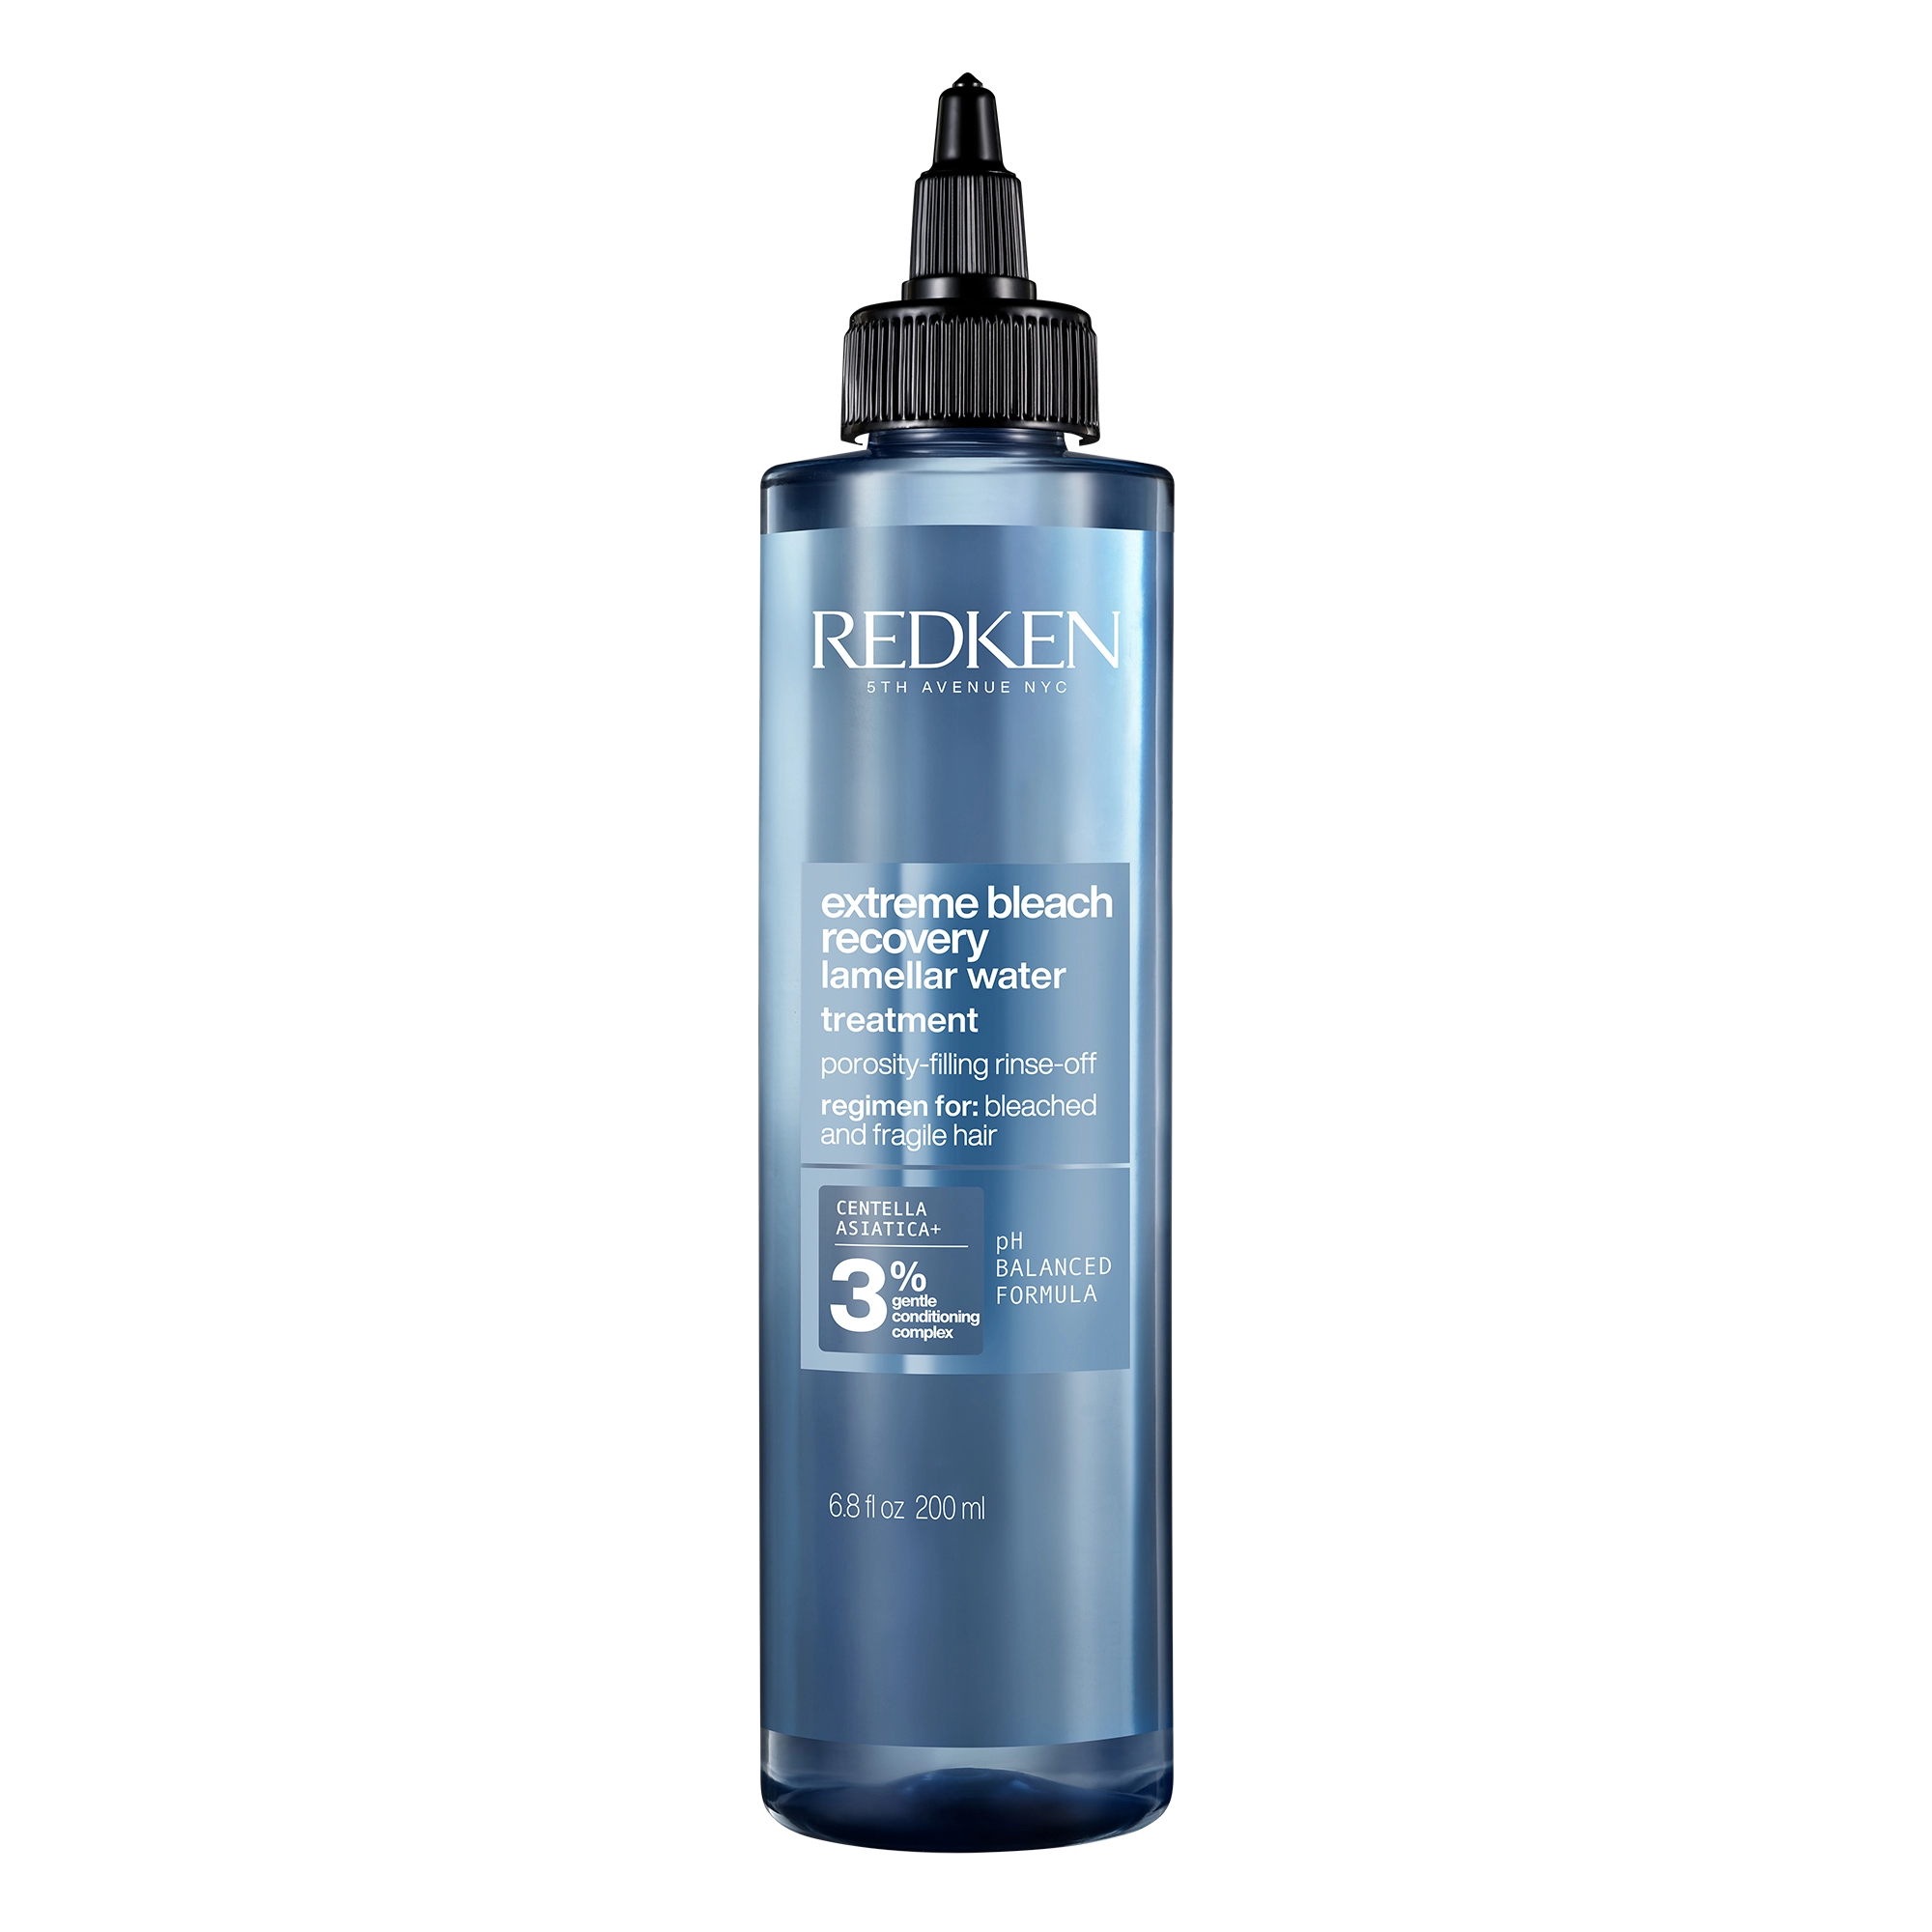 Redken-2020-Extreme-Bleach-Recovery-Lamellar-Treatment-Product-Shot-2000×2000